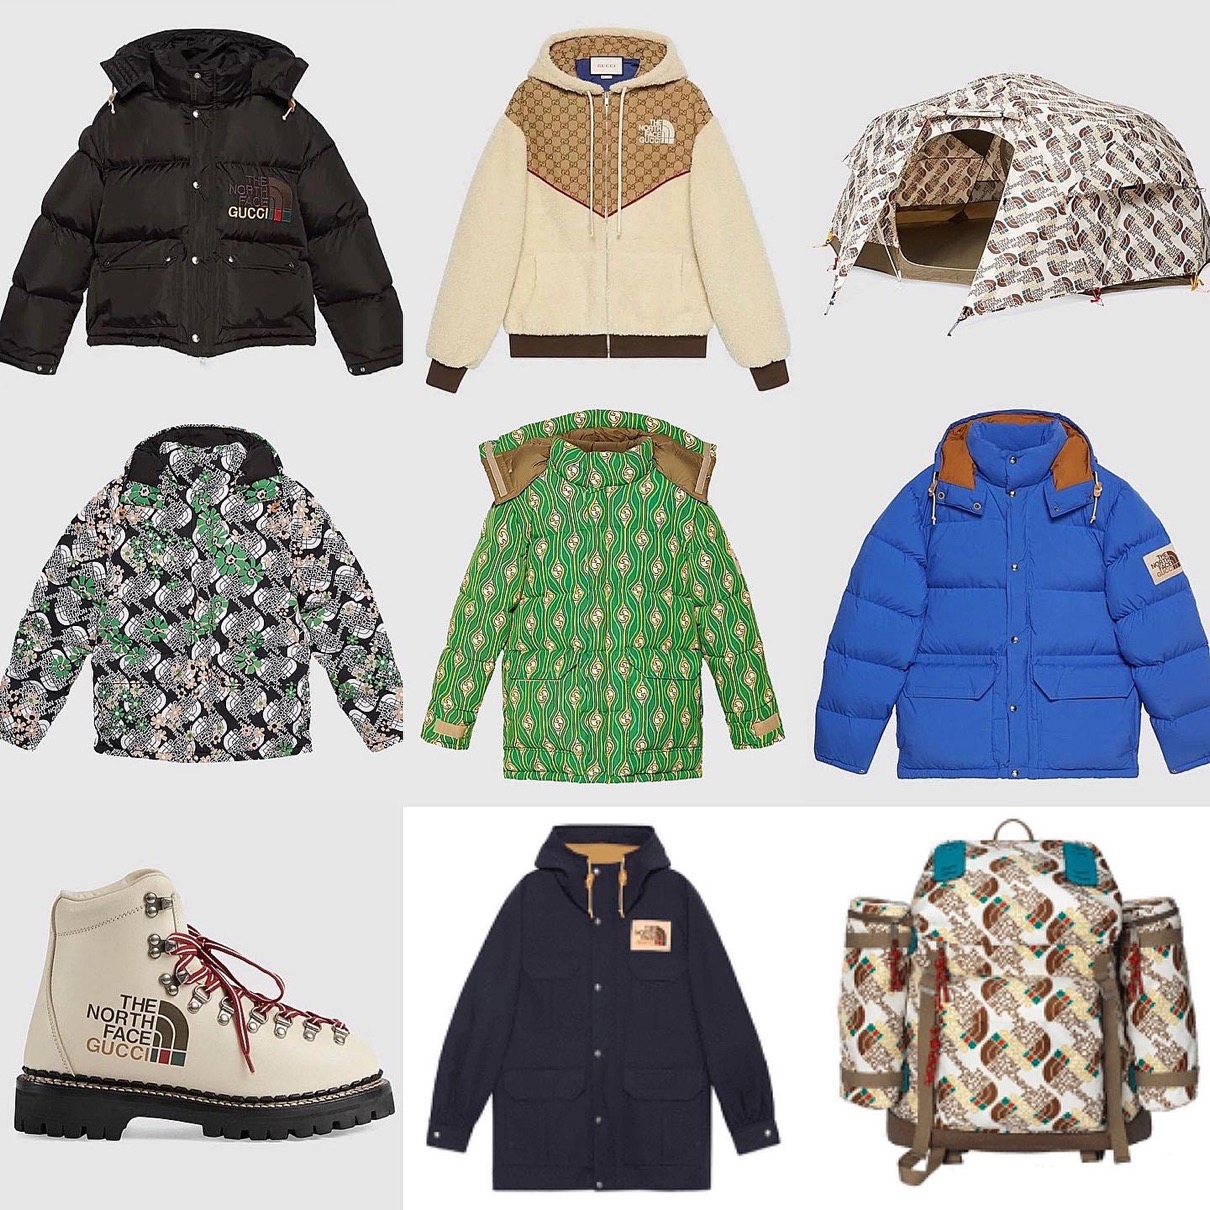 The North Face × Gucci】コラボコレクションが国内2021年1月6日/1月8日に発売予定 | UP TO DATE